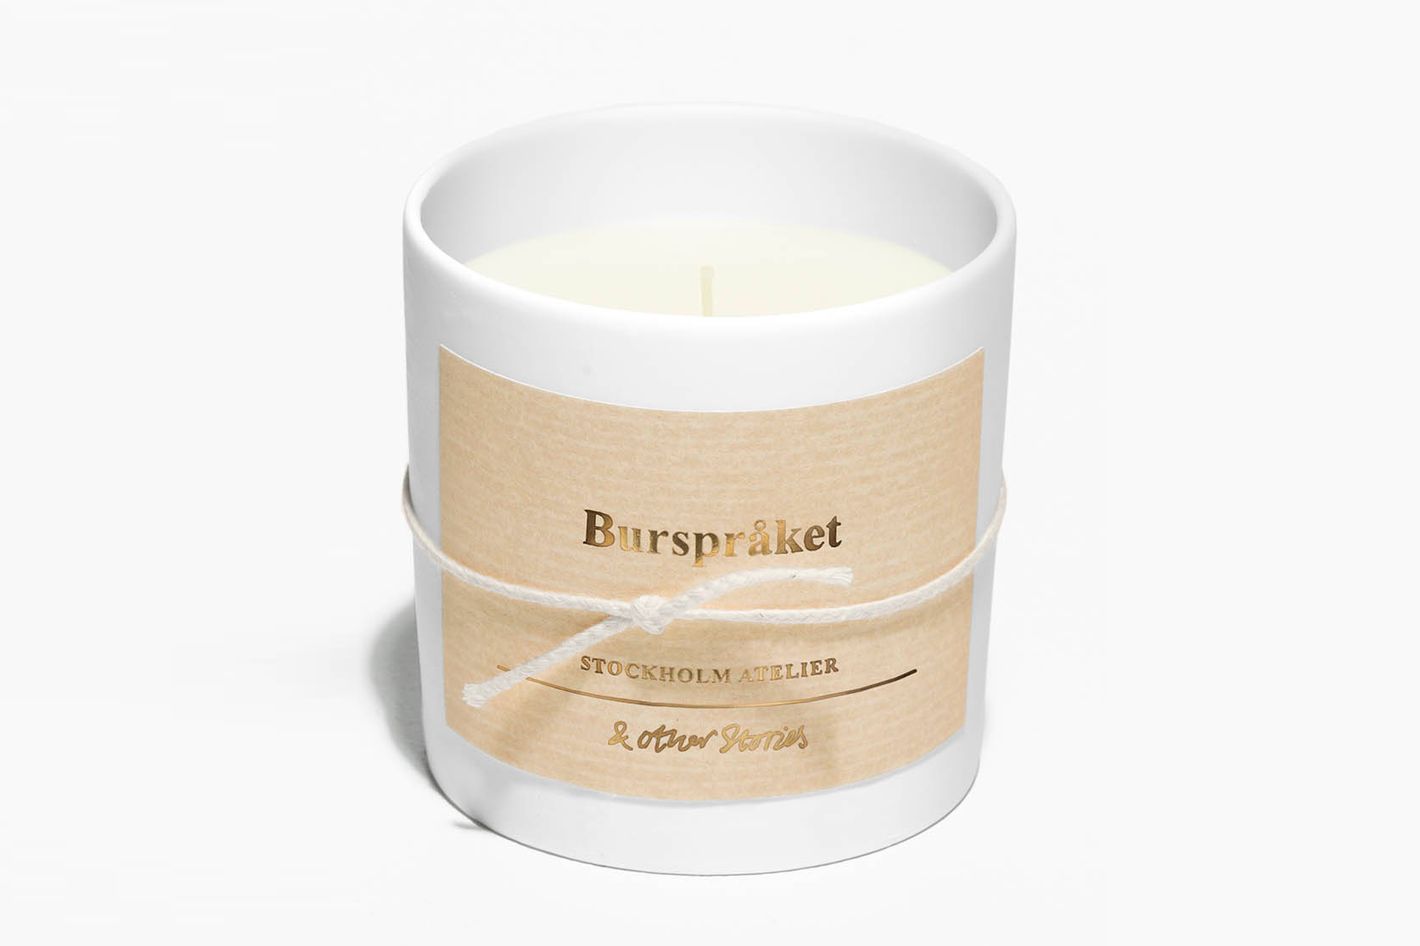 Affordable Candles That Smell Like the Holidays